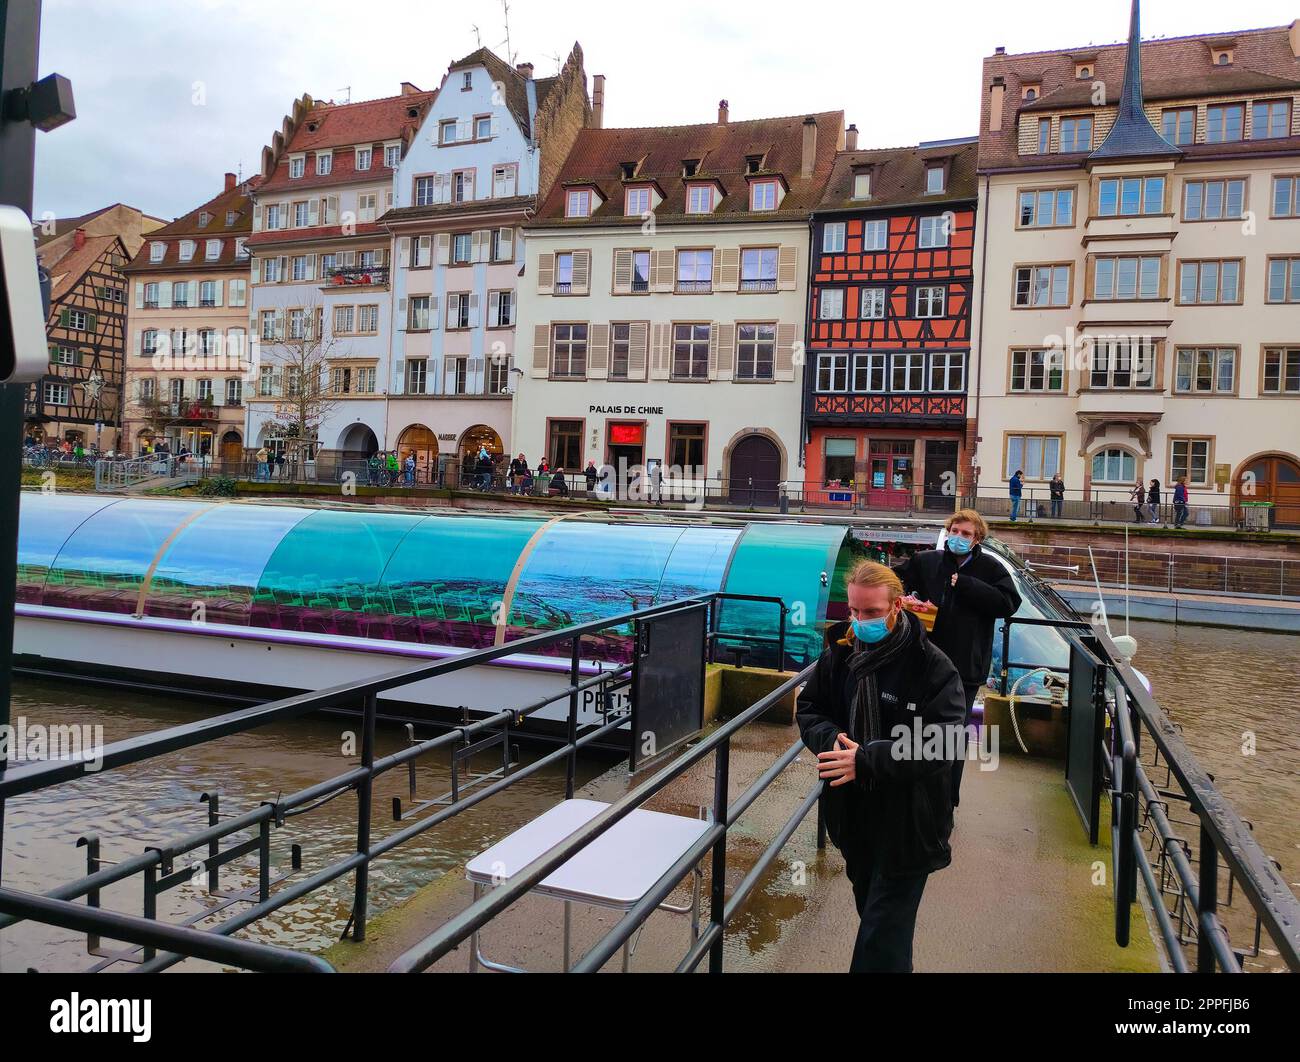 River tram with tourists on a water canal on ancient houses background. River view. Strasbourg city, France. Famous tourist destination, travel, tourism Stock Photo